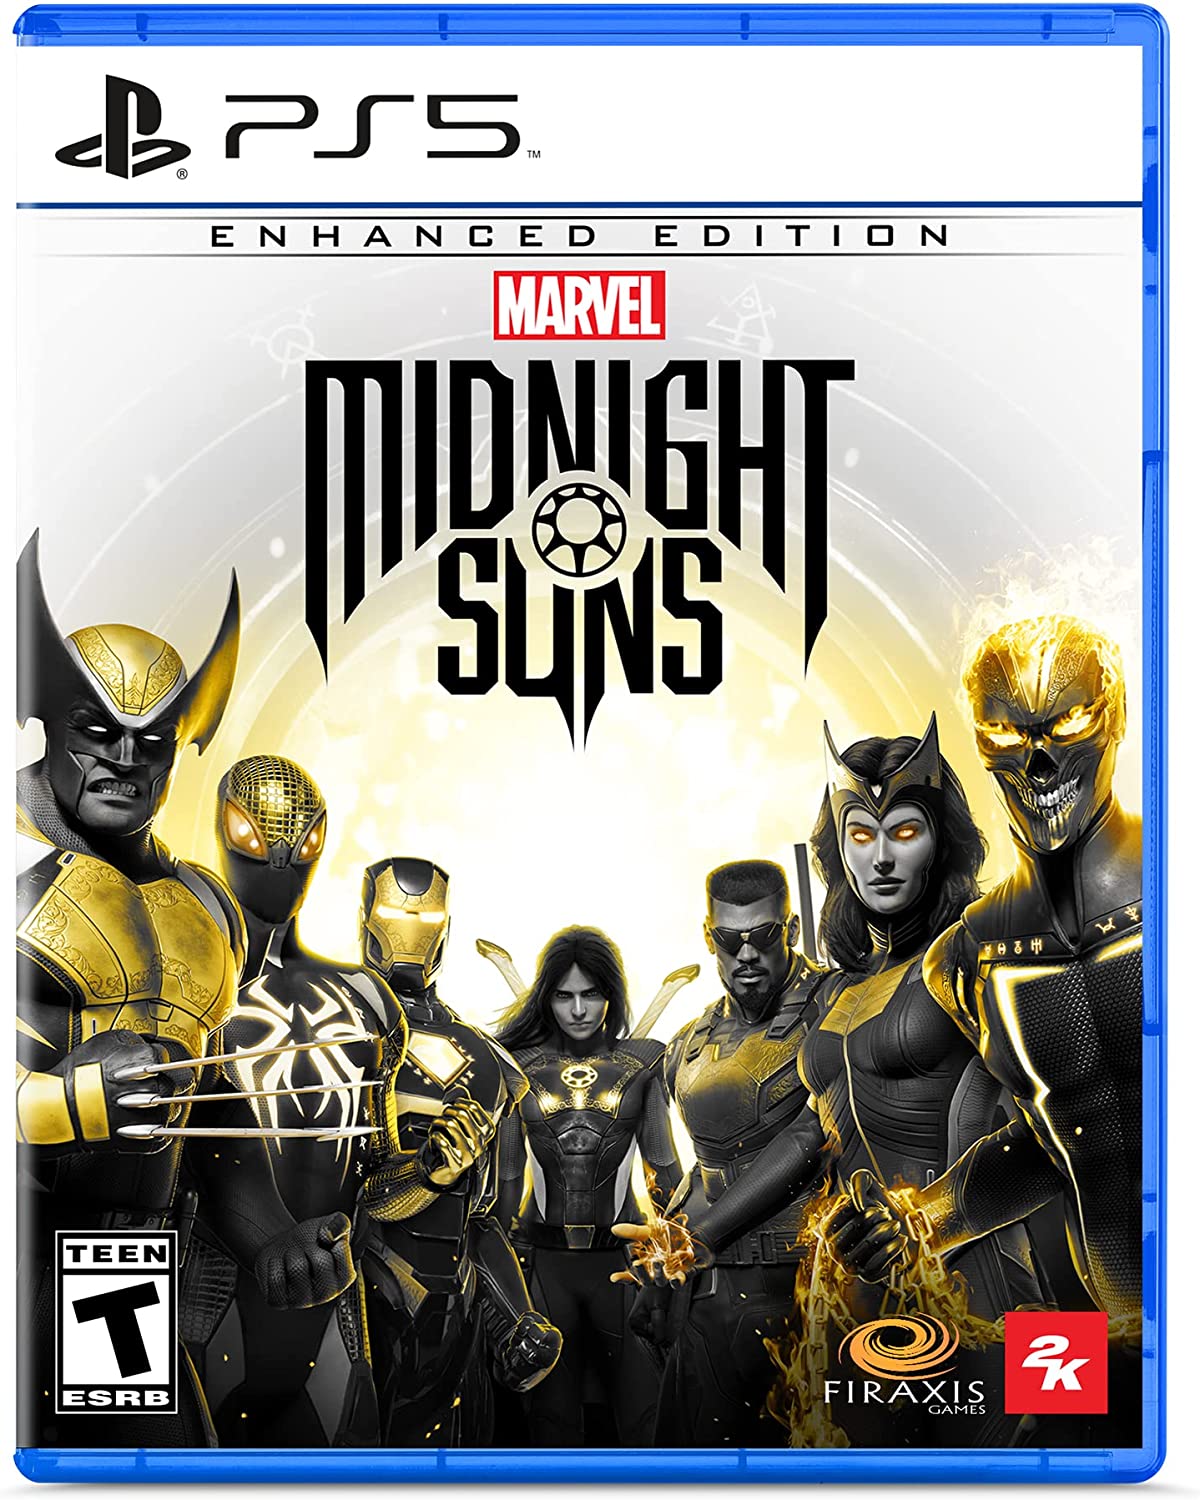 Marvel's Midnight Suns Enhanced Edition 5, Take 2 Interactive: Everything Else